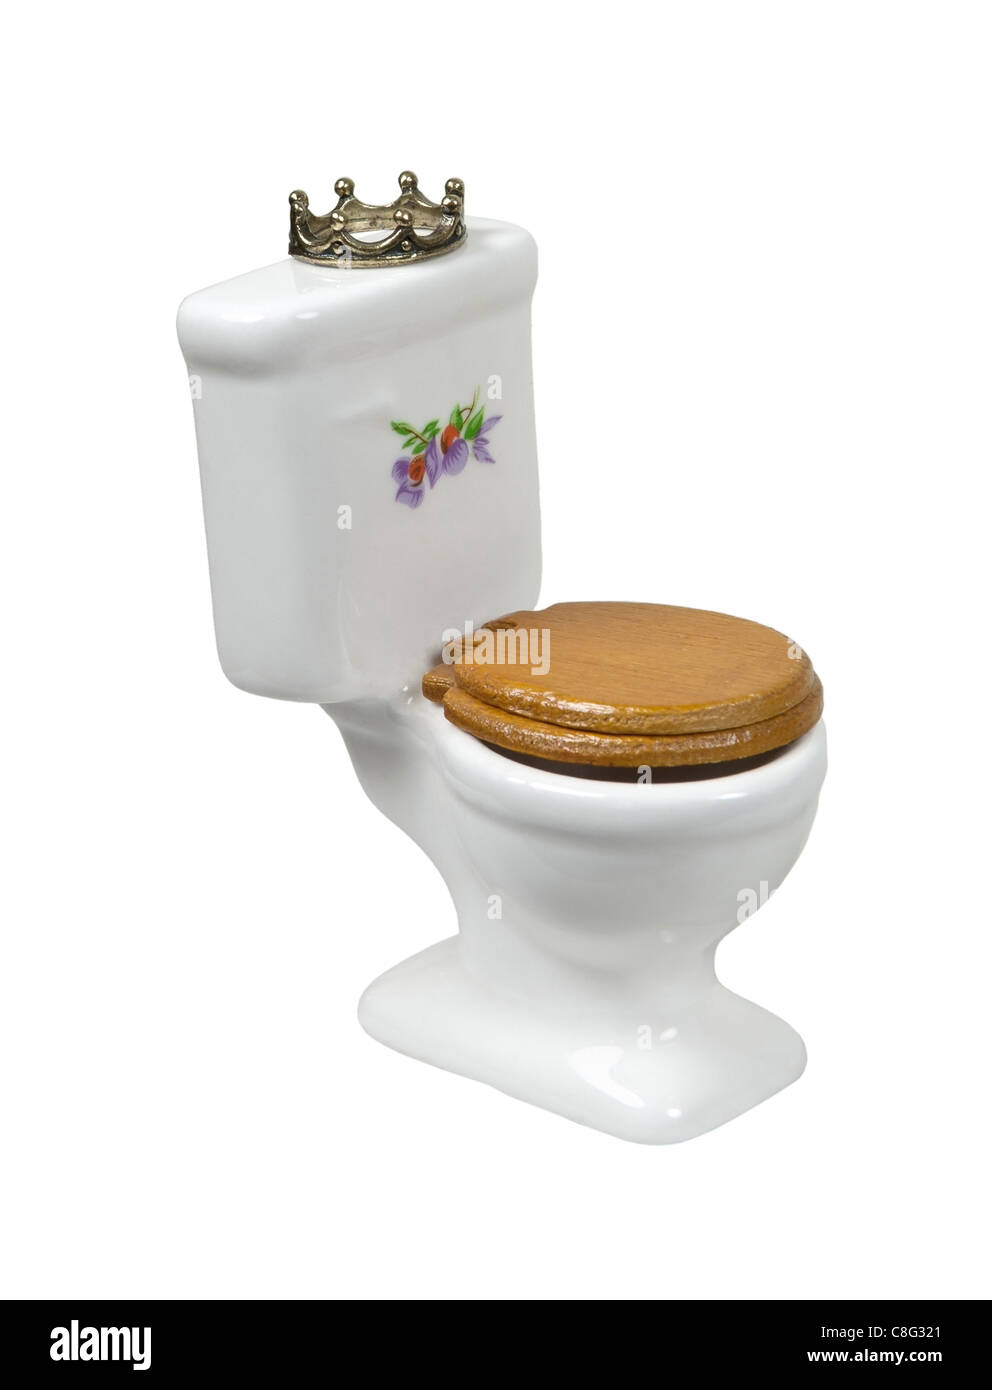 The home throne shown by a porcelain toilet with wooden seat with a crown - path included Stock Photo